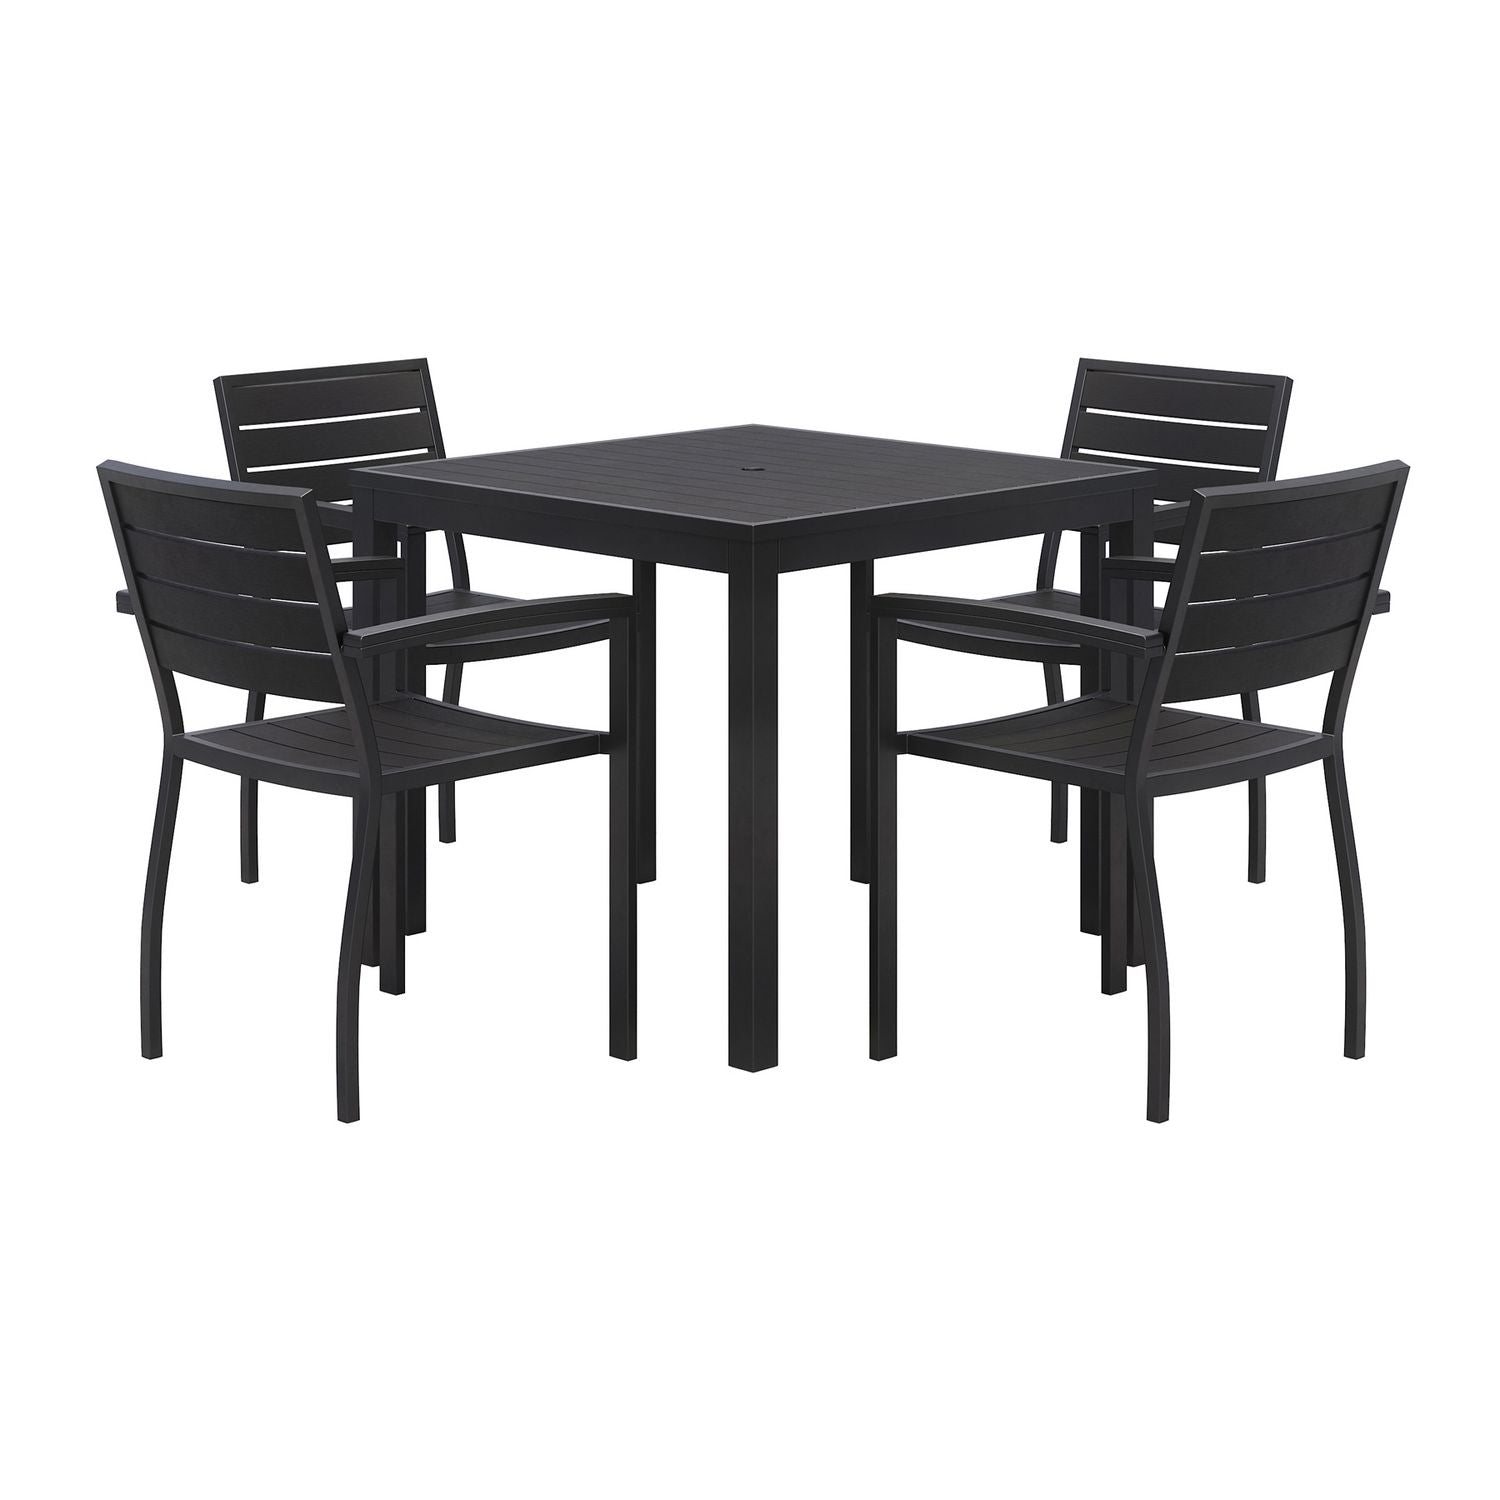 eveleen-outdoor-patio-table-with-four-black-powder-coated-polymer-chairs-square-35-black-ships-in-4-6-business-days_kfi840031925183 - 1